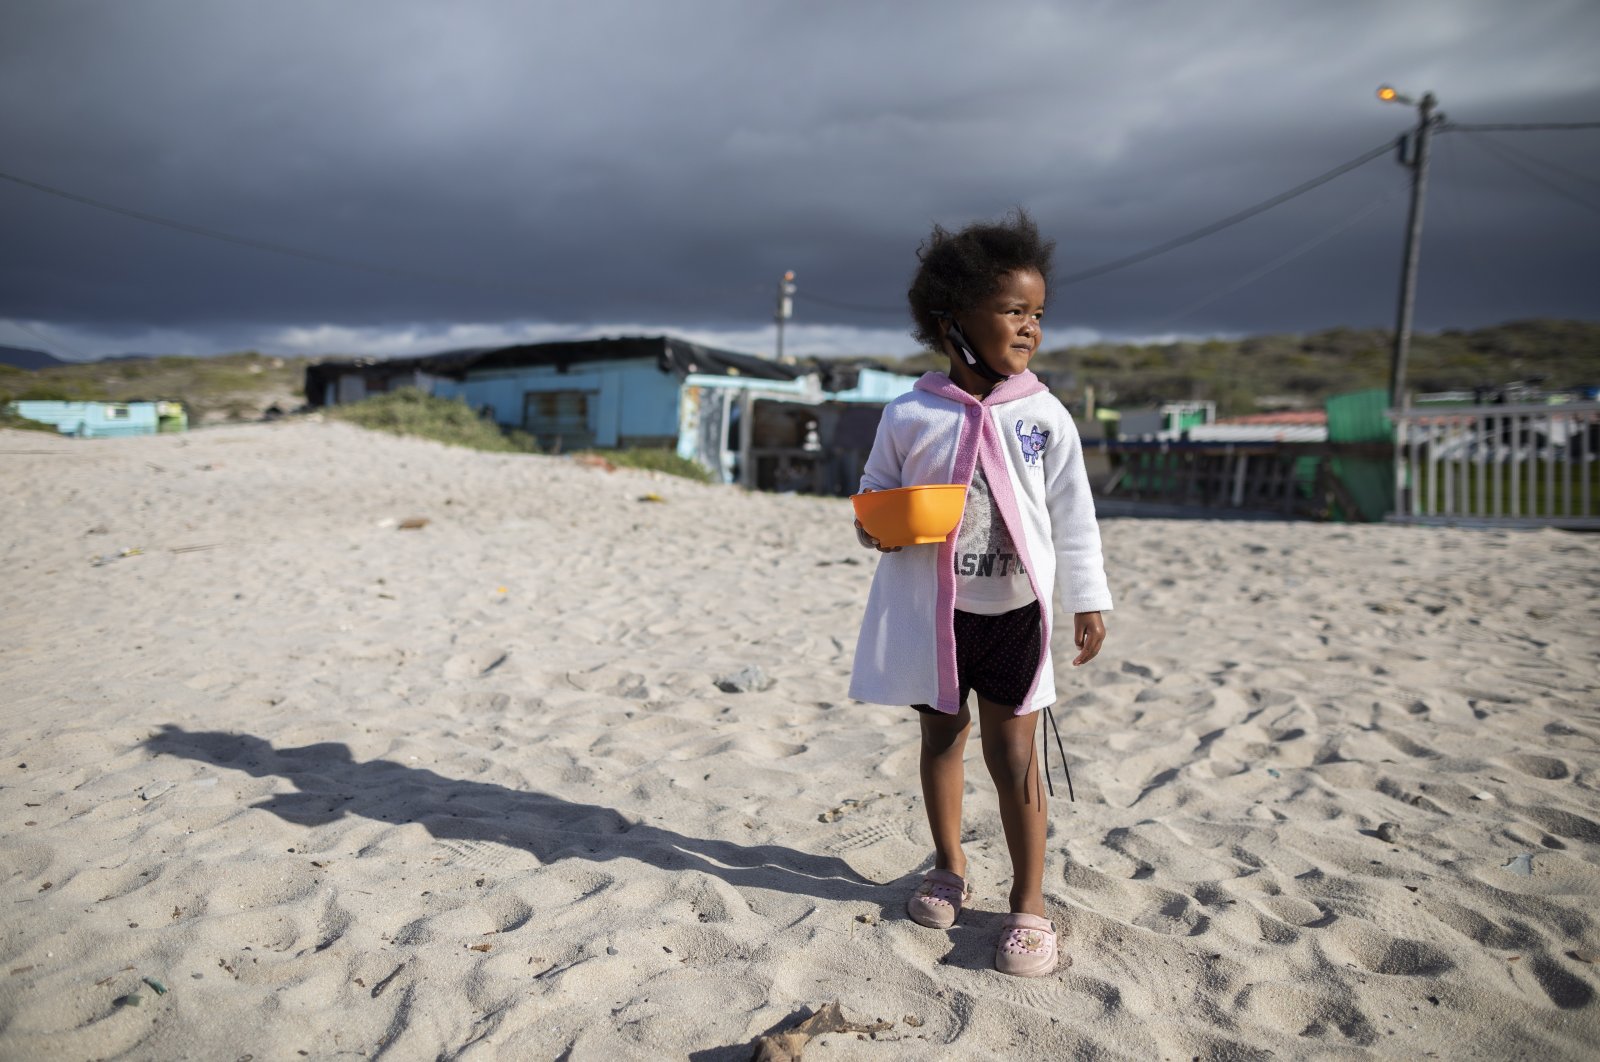 A girl from the 7de Laan shack settlement waits for food from the 9 Miles Project COVID-19 community support program in Strandfontein, Cape Town, South Africa, April 20, 2020. (EPA Photo)